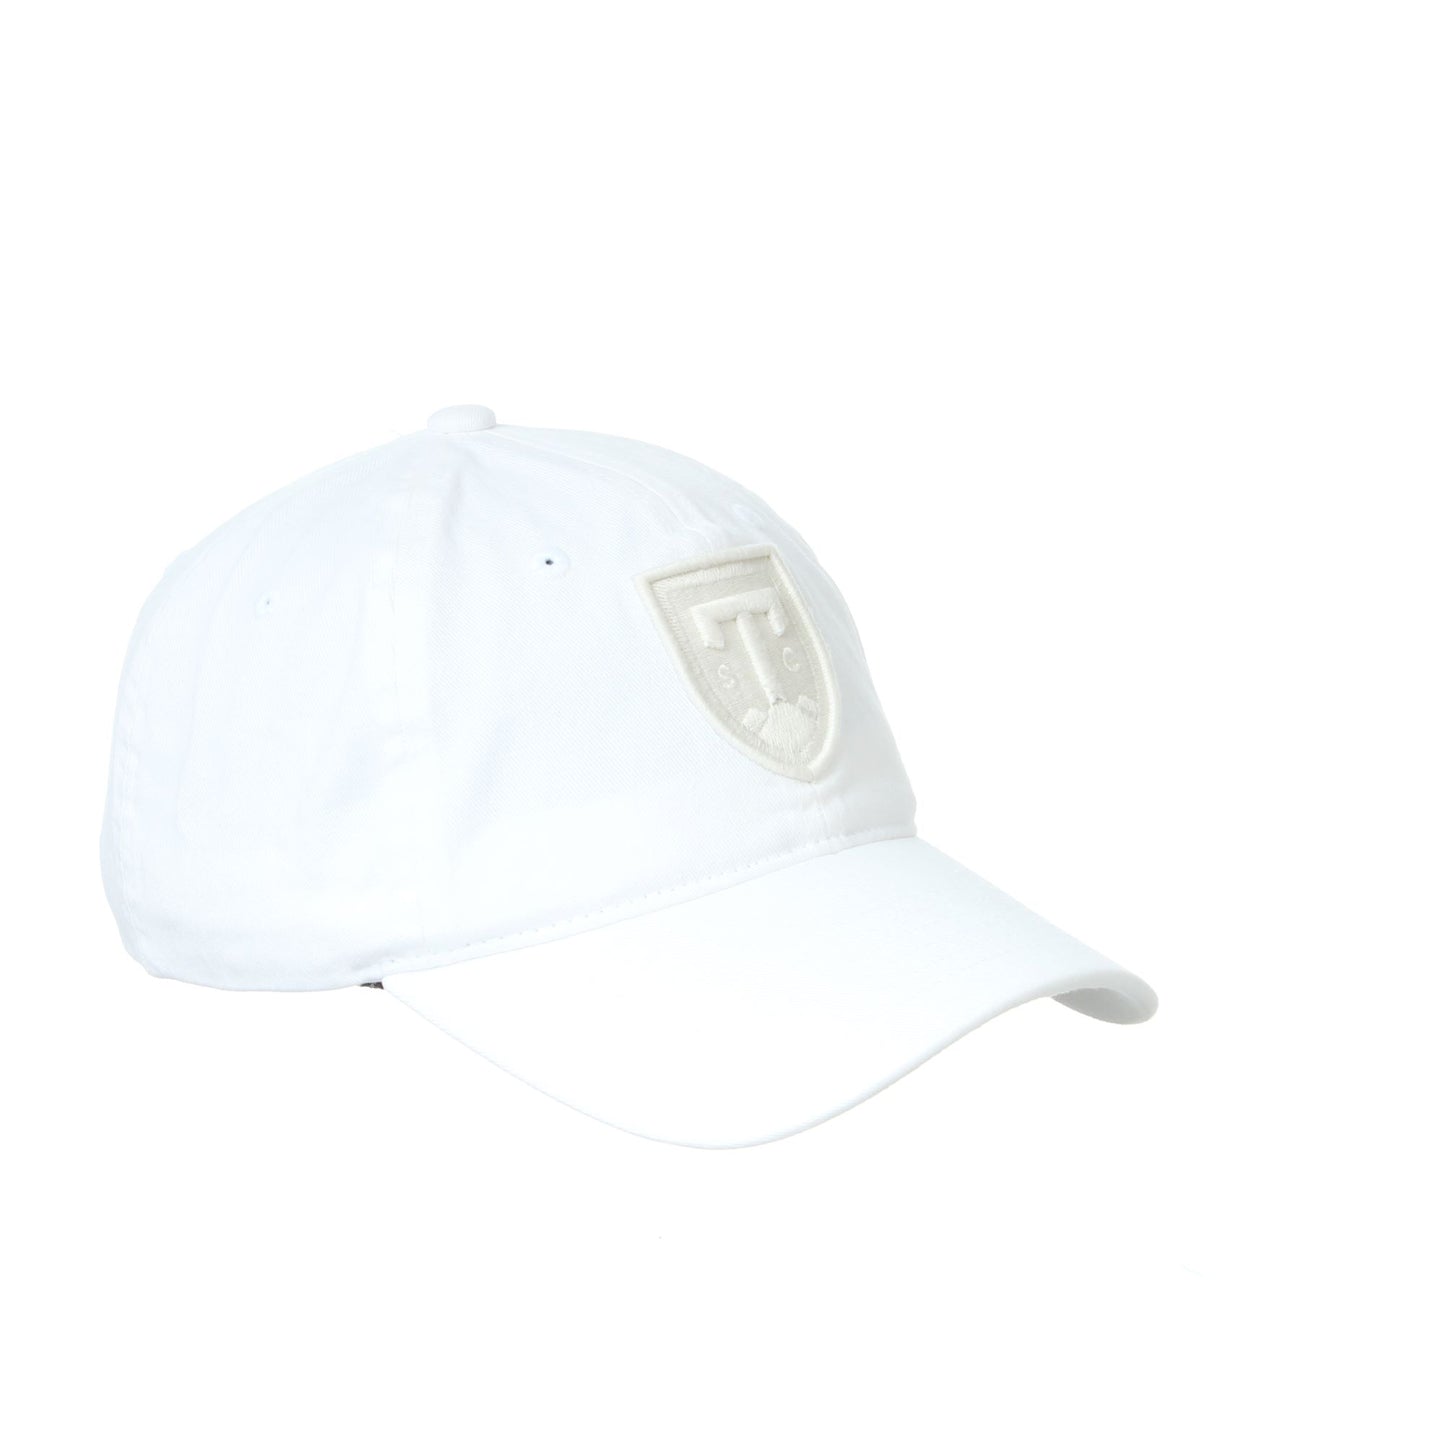 Triumph Scholarship Relaxed Fit Adjustable Hat - White